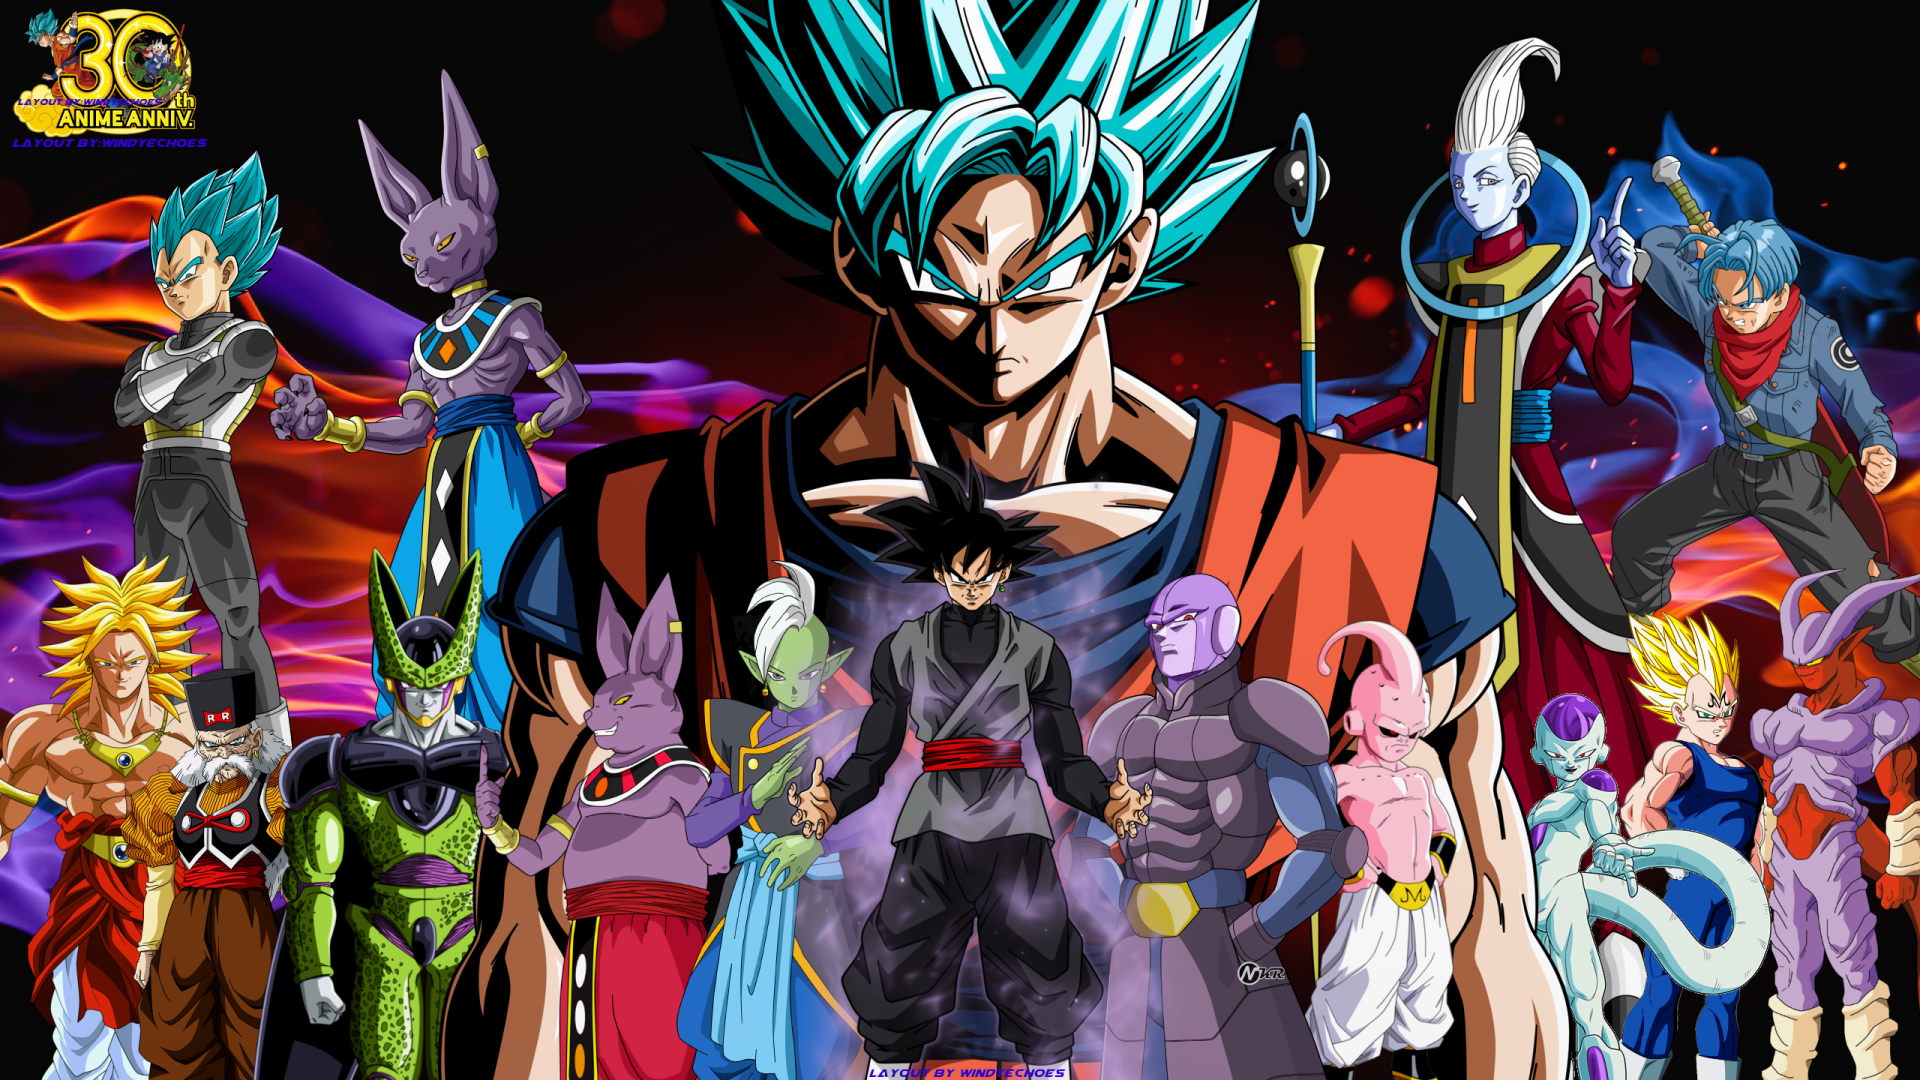 Dragon Ball Z Wallpapers  Top 35 Best Dragon Ball Z Backgrounds Download